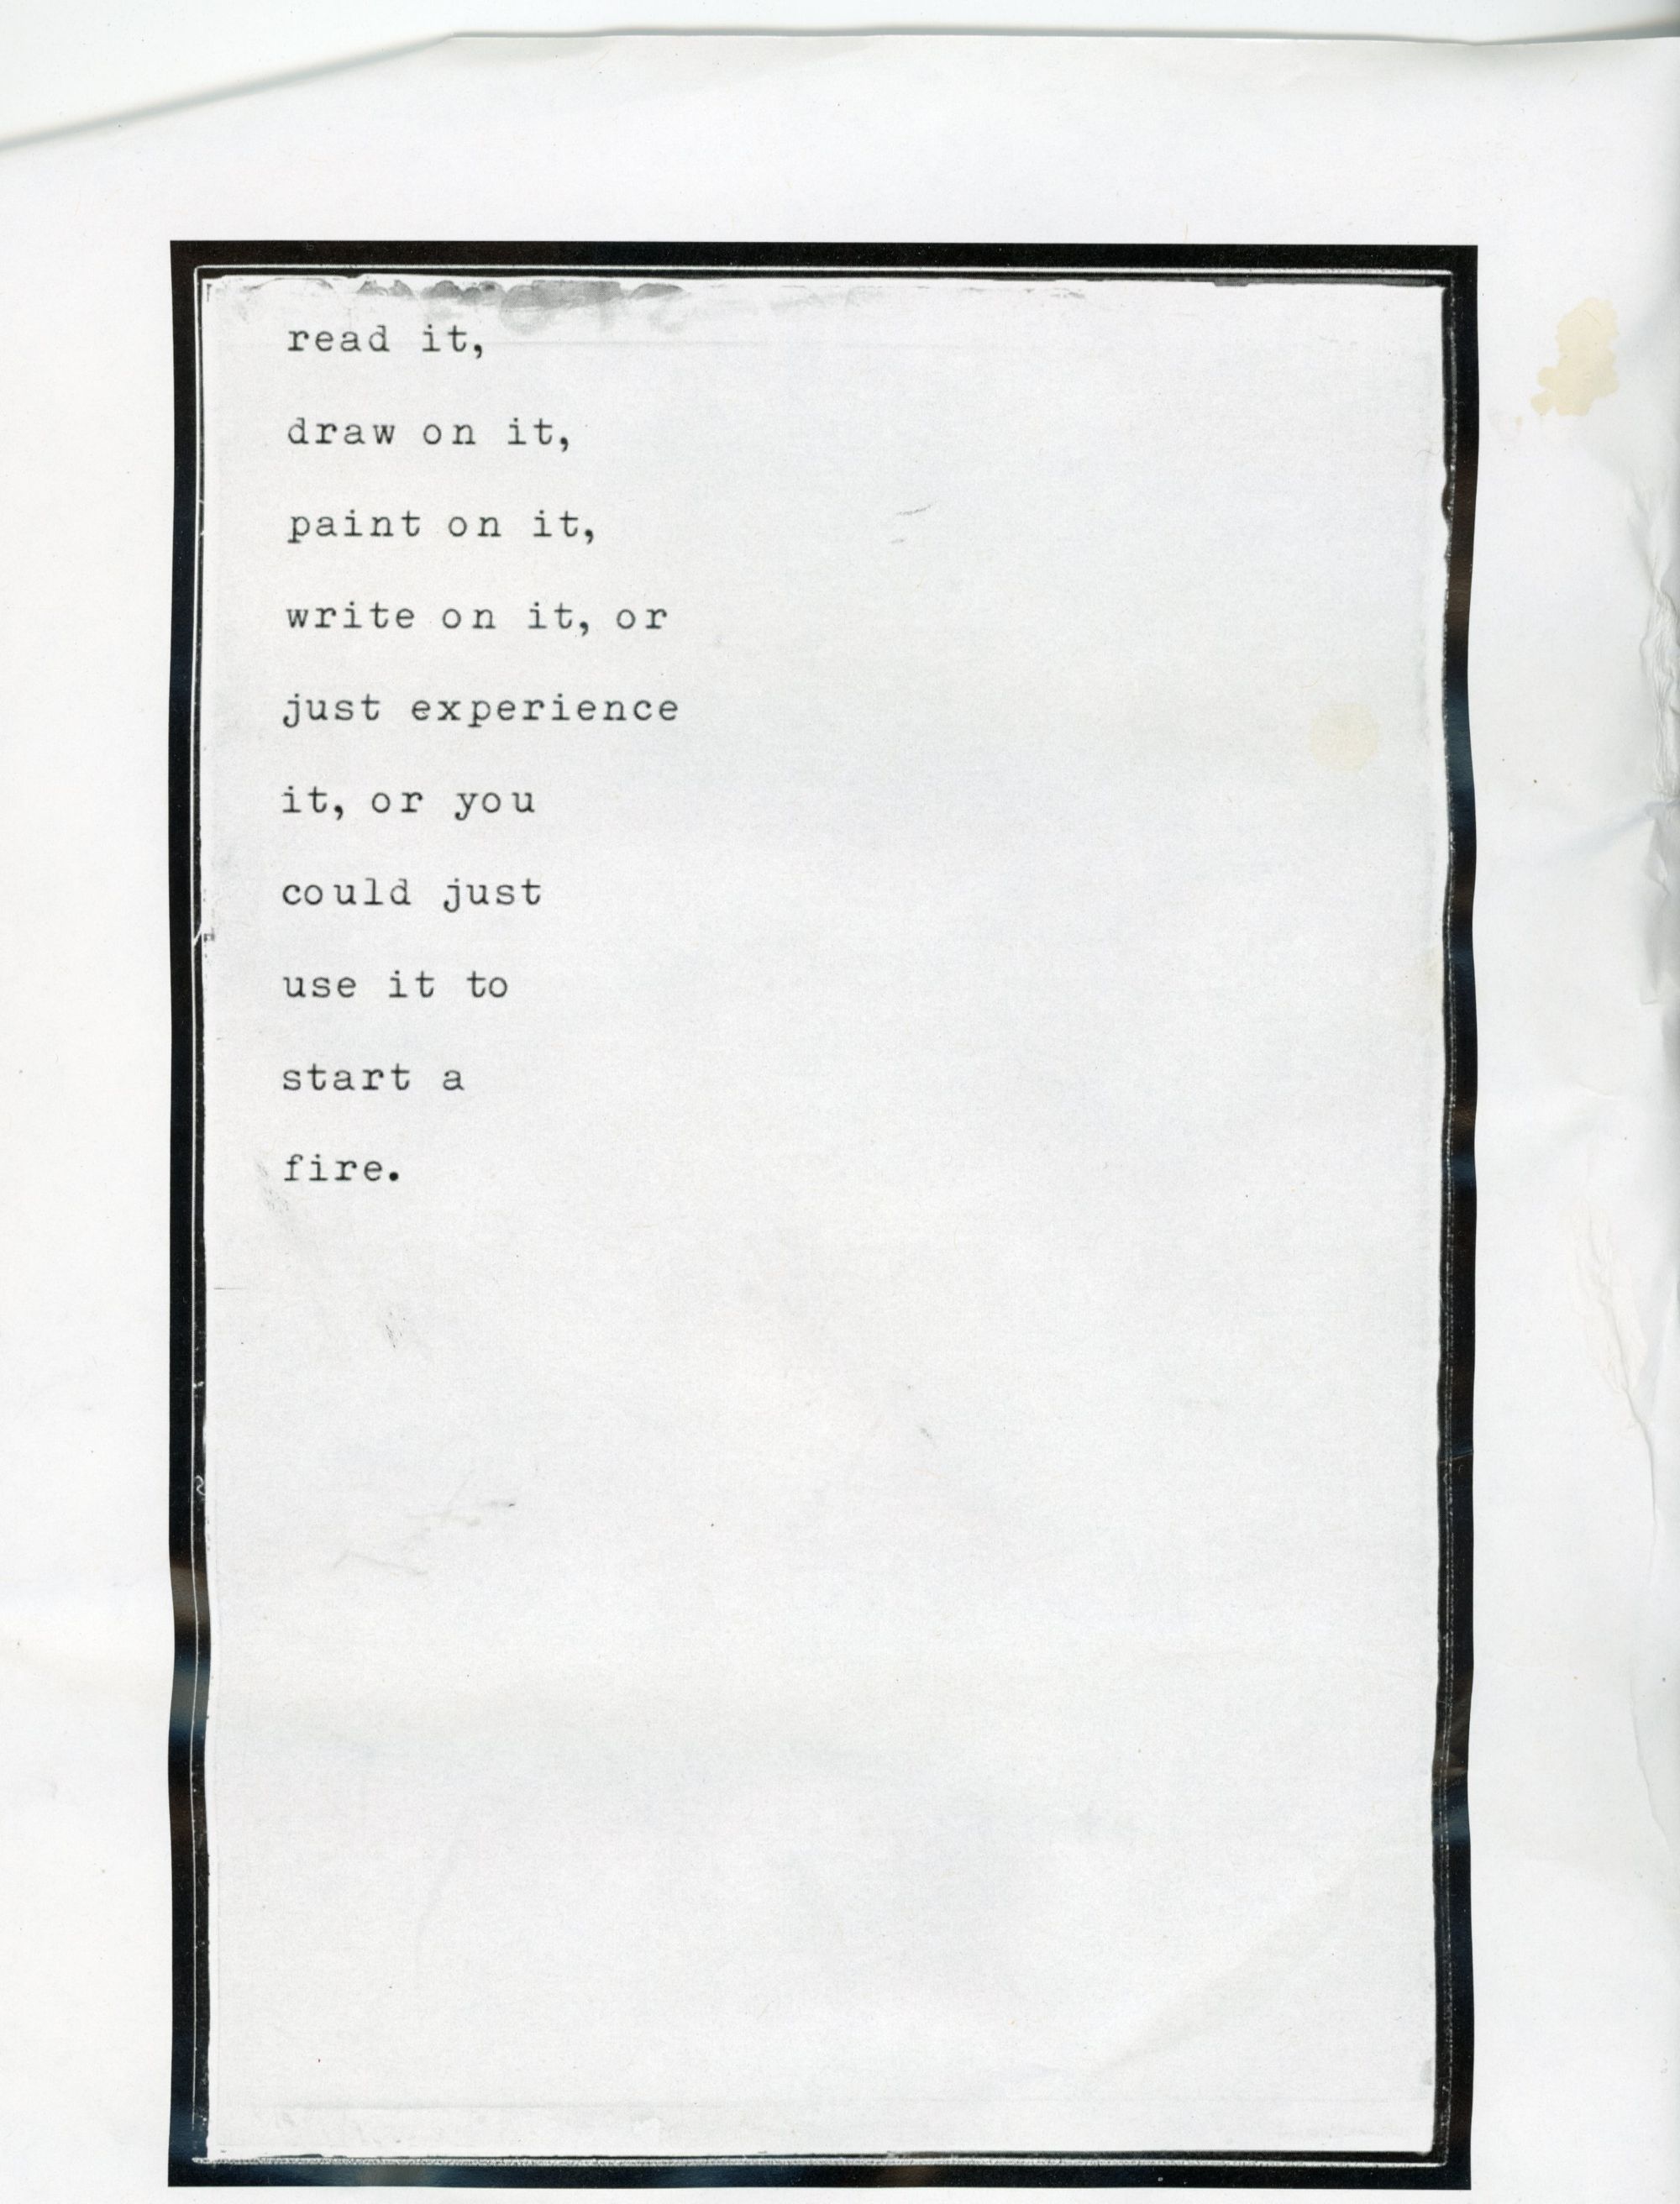 The first page in Chuck Cunningham's No Context zine. It's simple text, urging the reader to engage with the photos however they see fit.